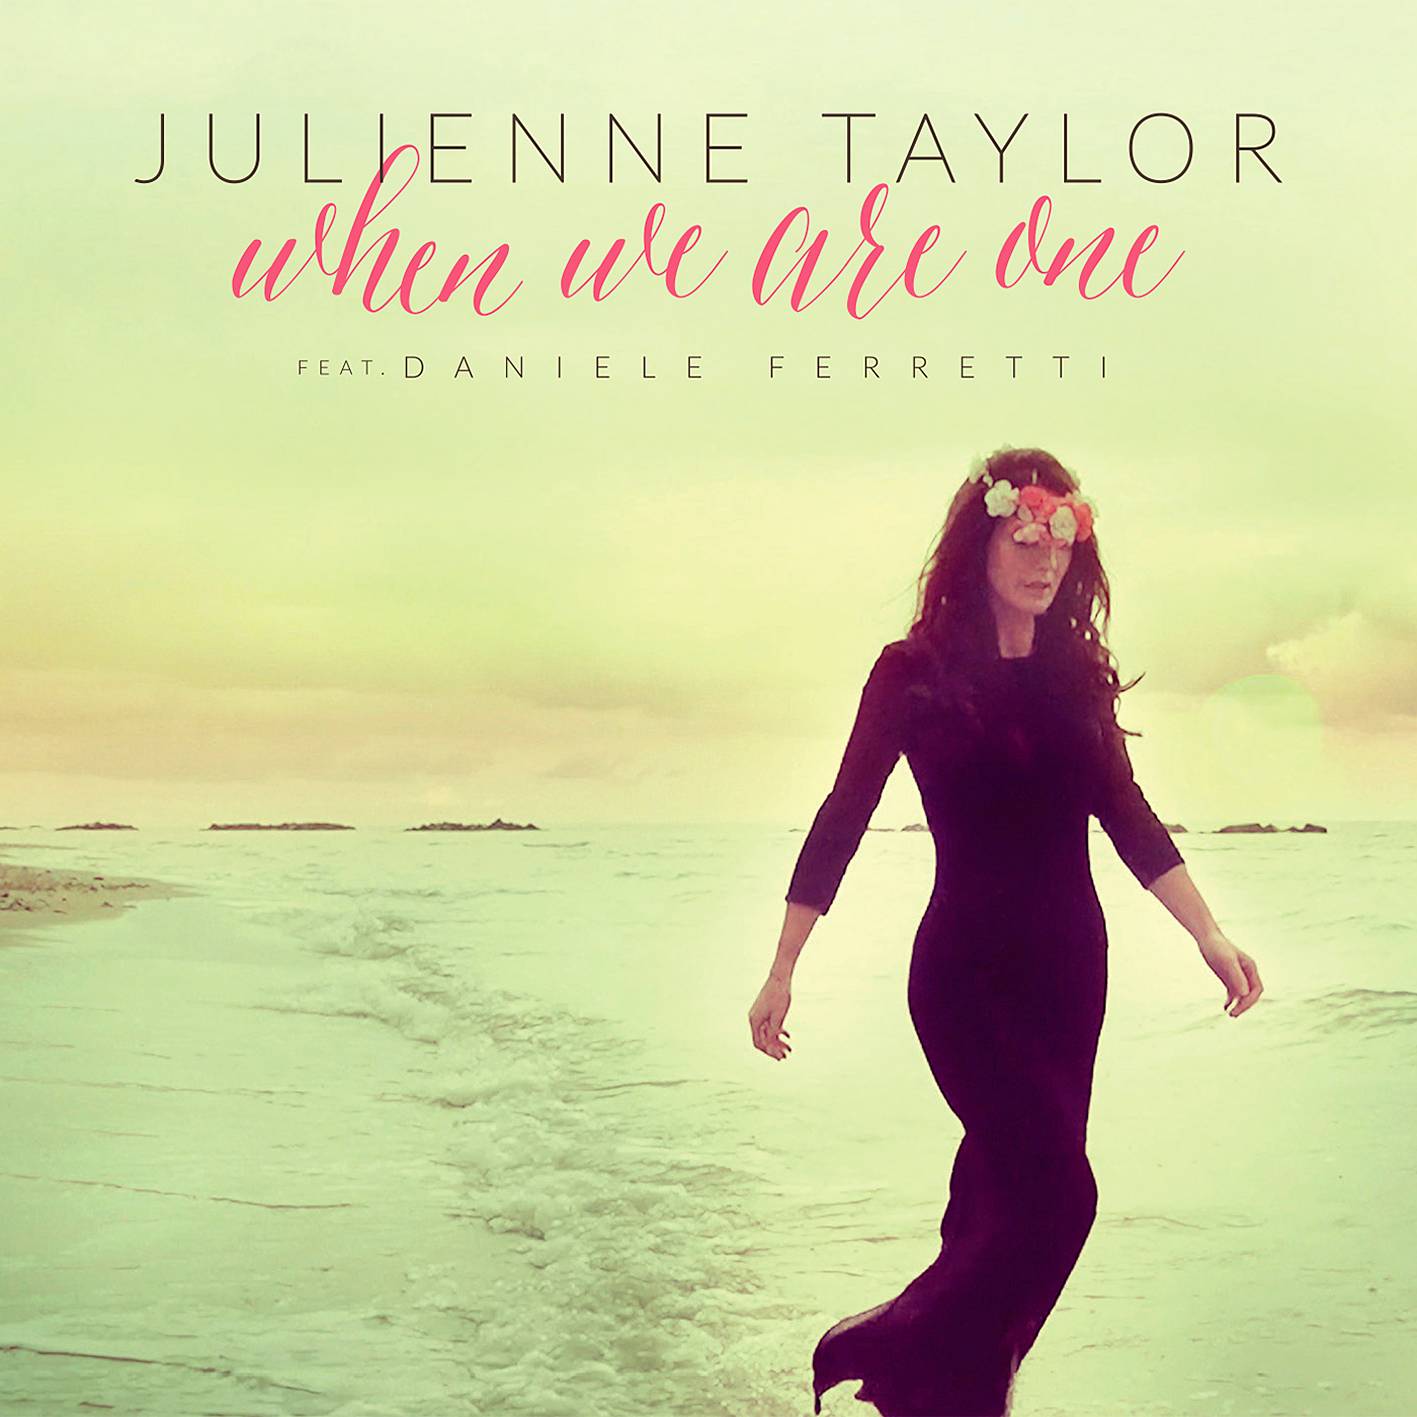 Julienne Taylor – When We Are One (2016) SACD ISO + FLAC 24bit/88,2kHz